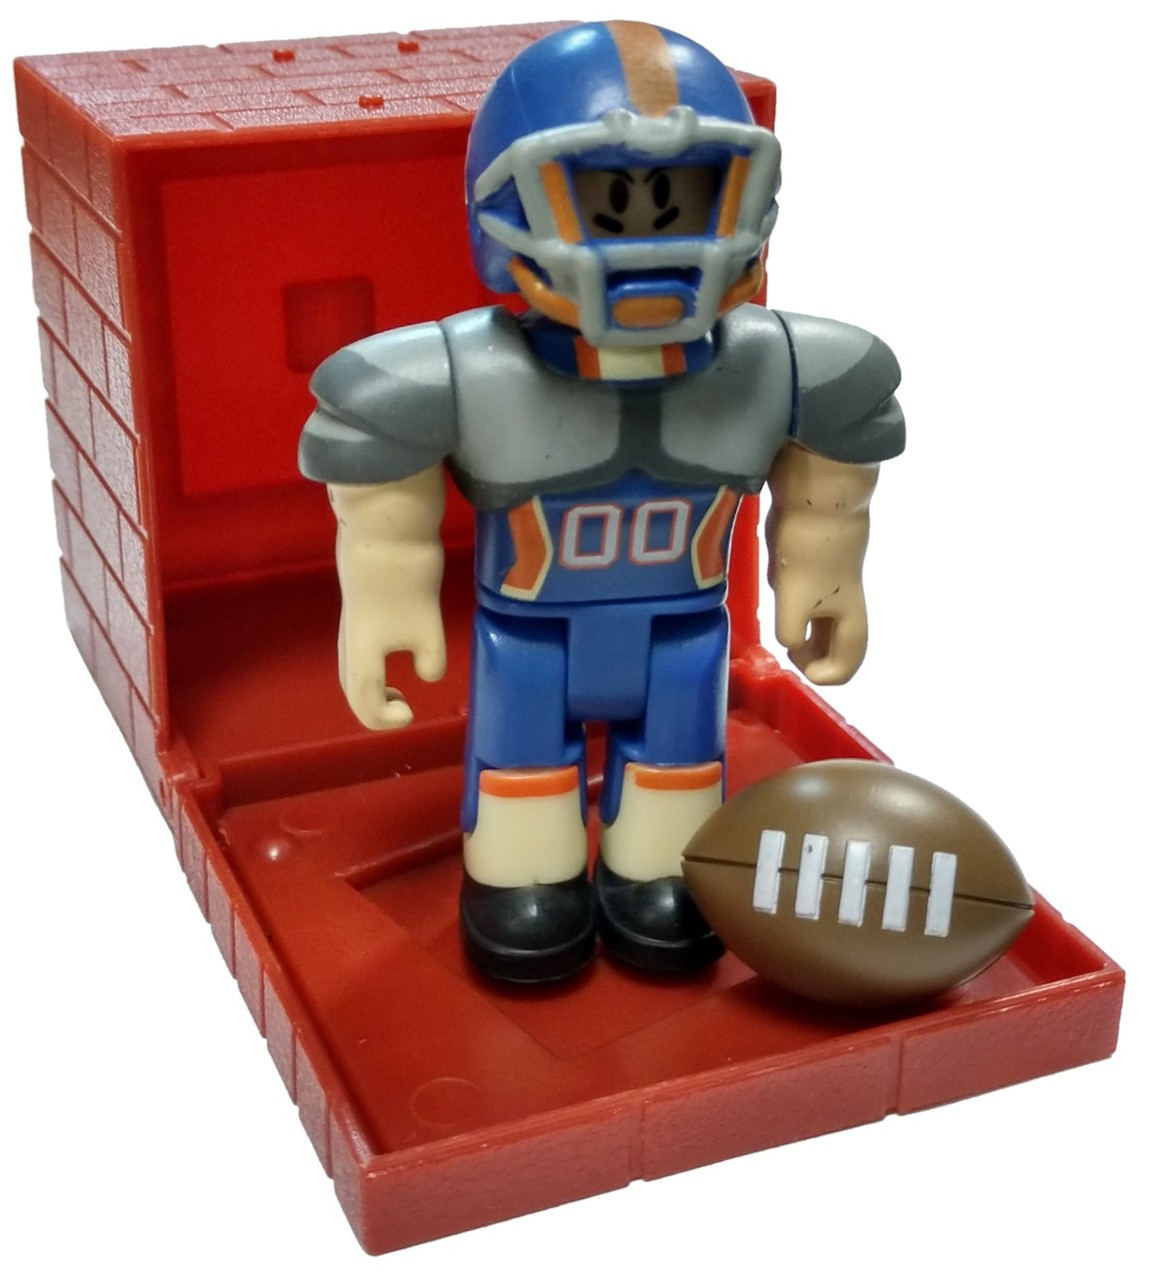 Roblox Red Series 4 Roblox High School Quarterback 3 Mini Figure With Red Cube And Online Code Loose Jazwares Toywiz - assassin's creed robloxian high school